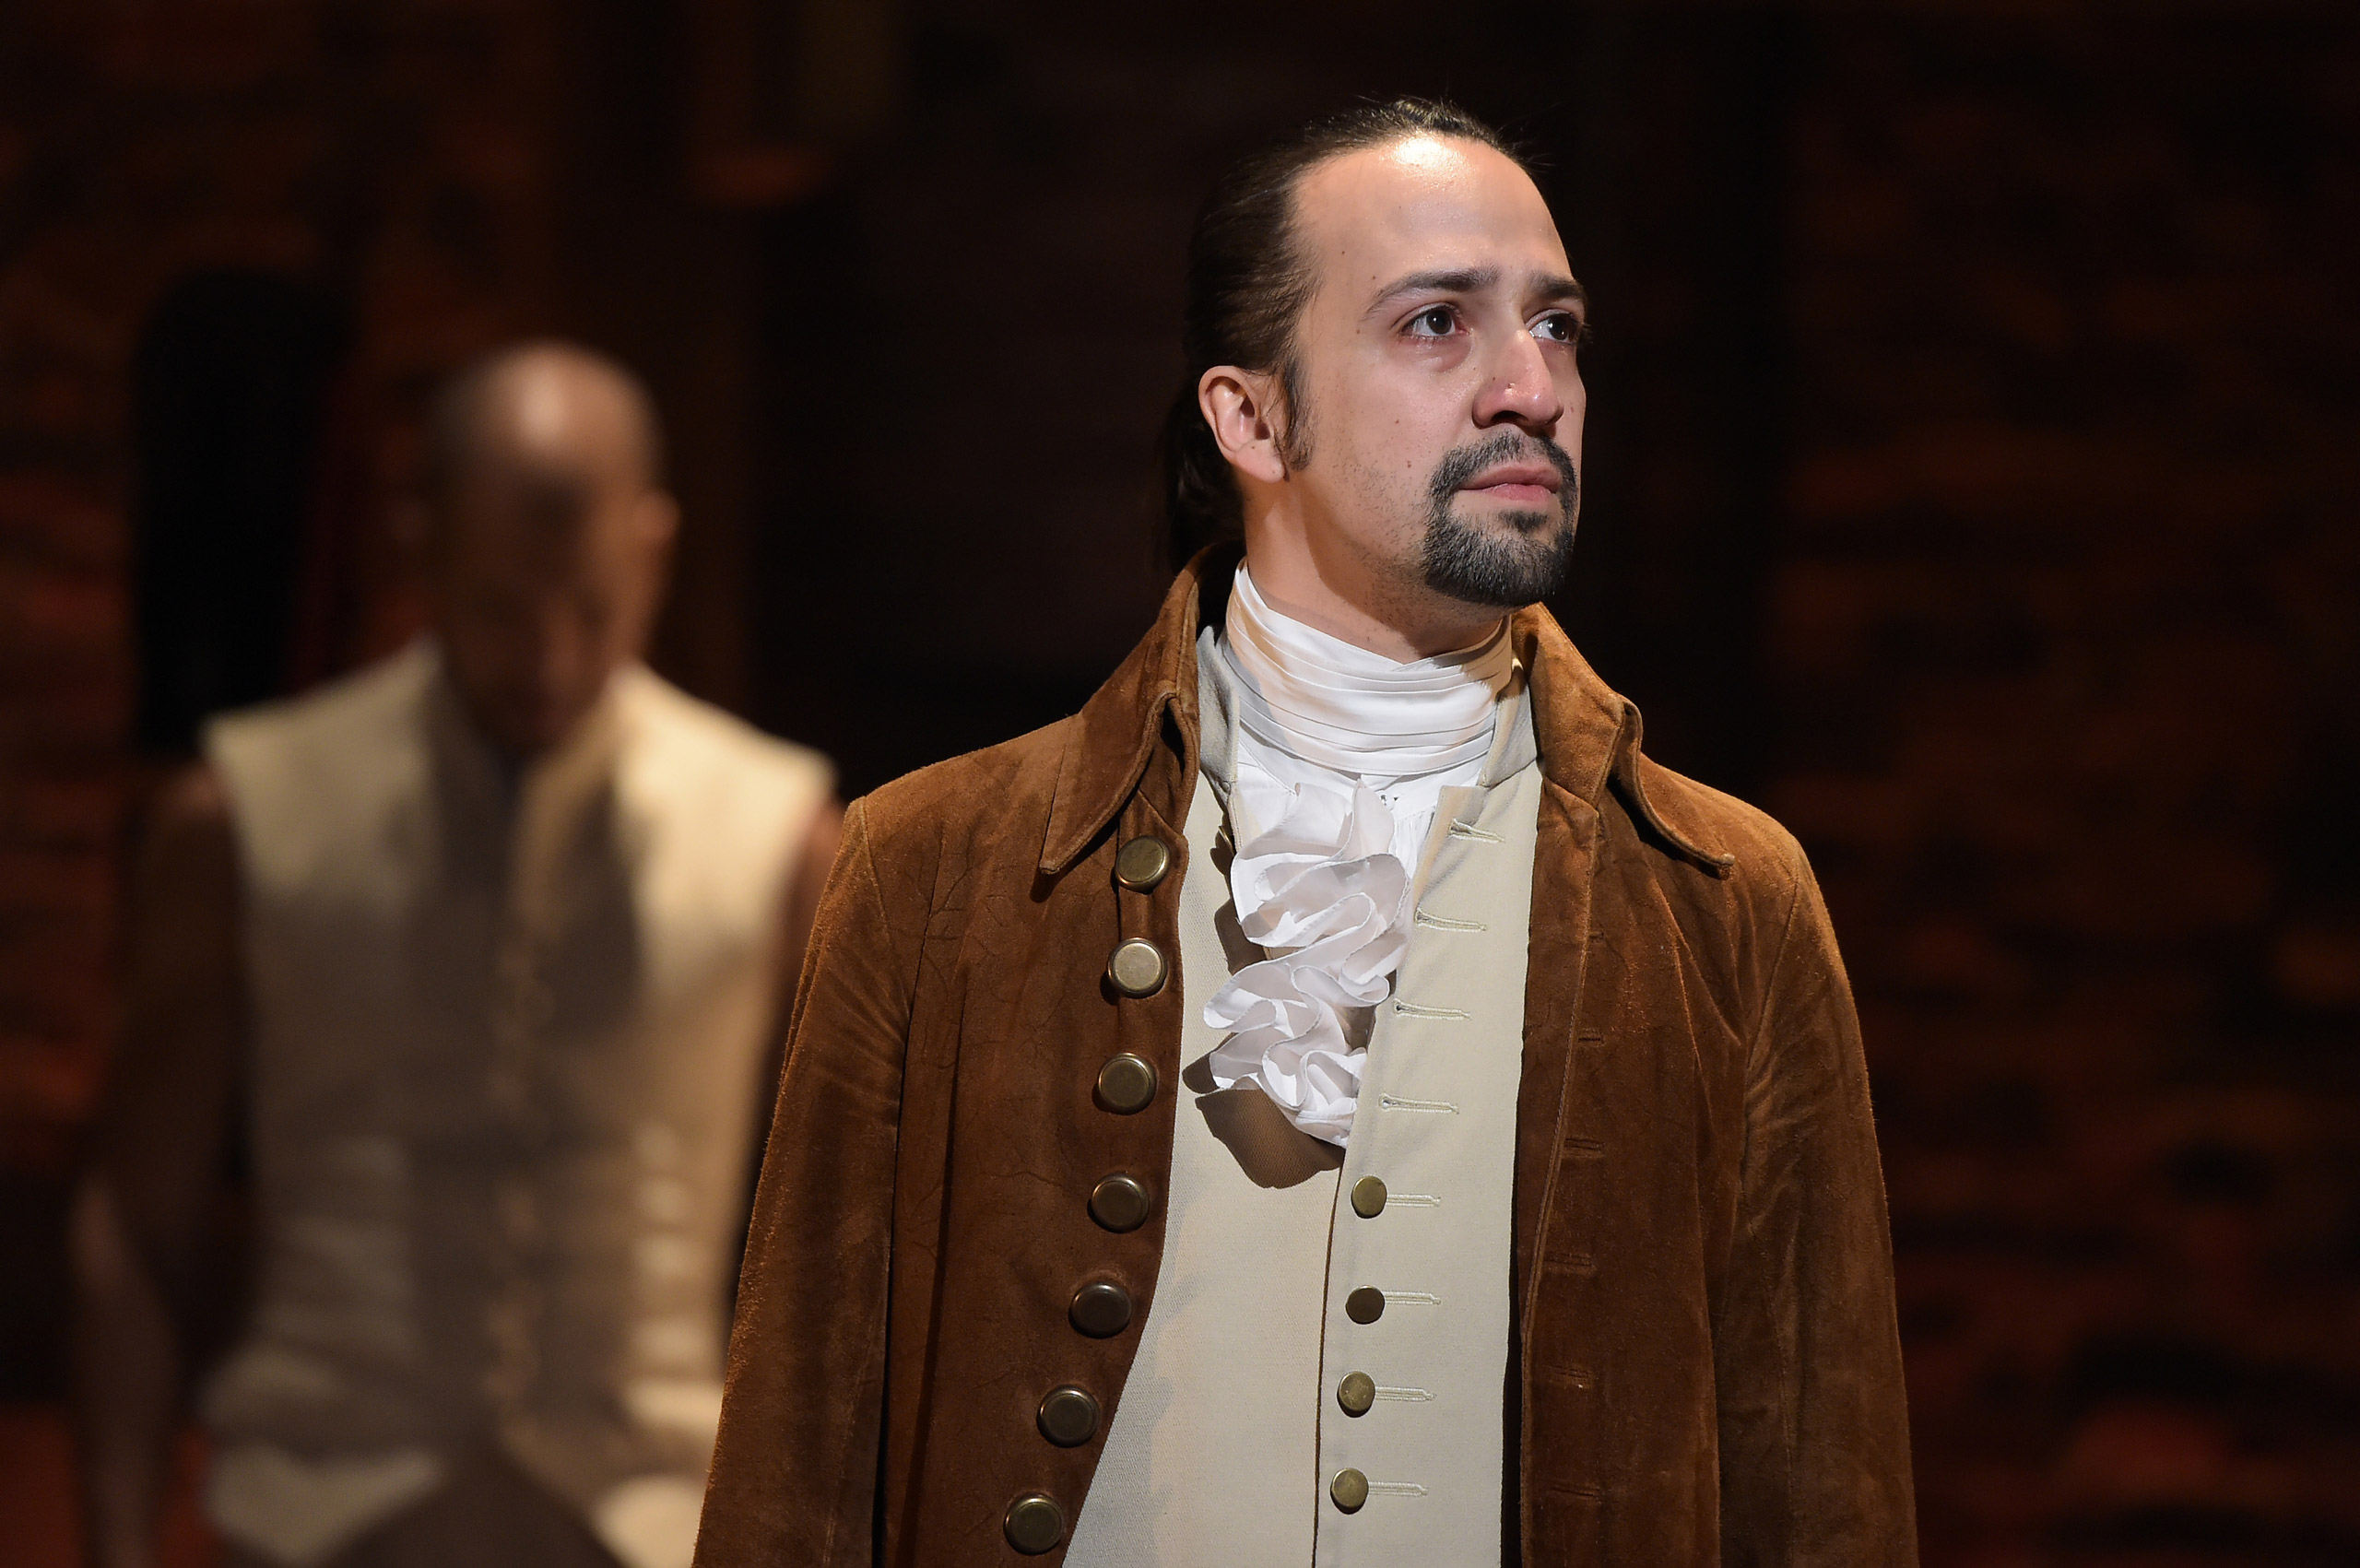 Actor, composer Lin-Manuel Miranda is seen on stage during the "Hamilton" performance for the 58th GRAMMY Awards in New York on Feb. 15, 2016. (Theo Wargo—WireImage/Getty Images)